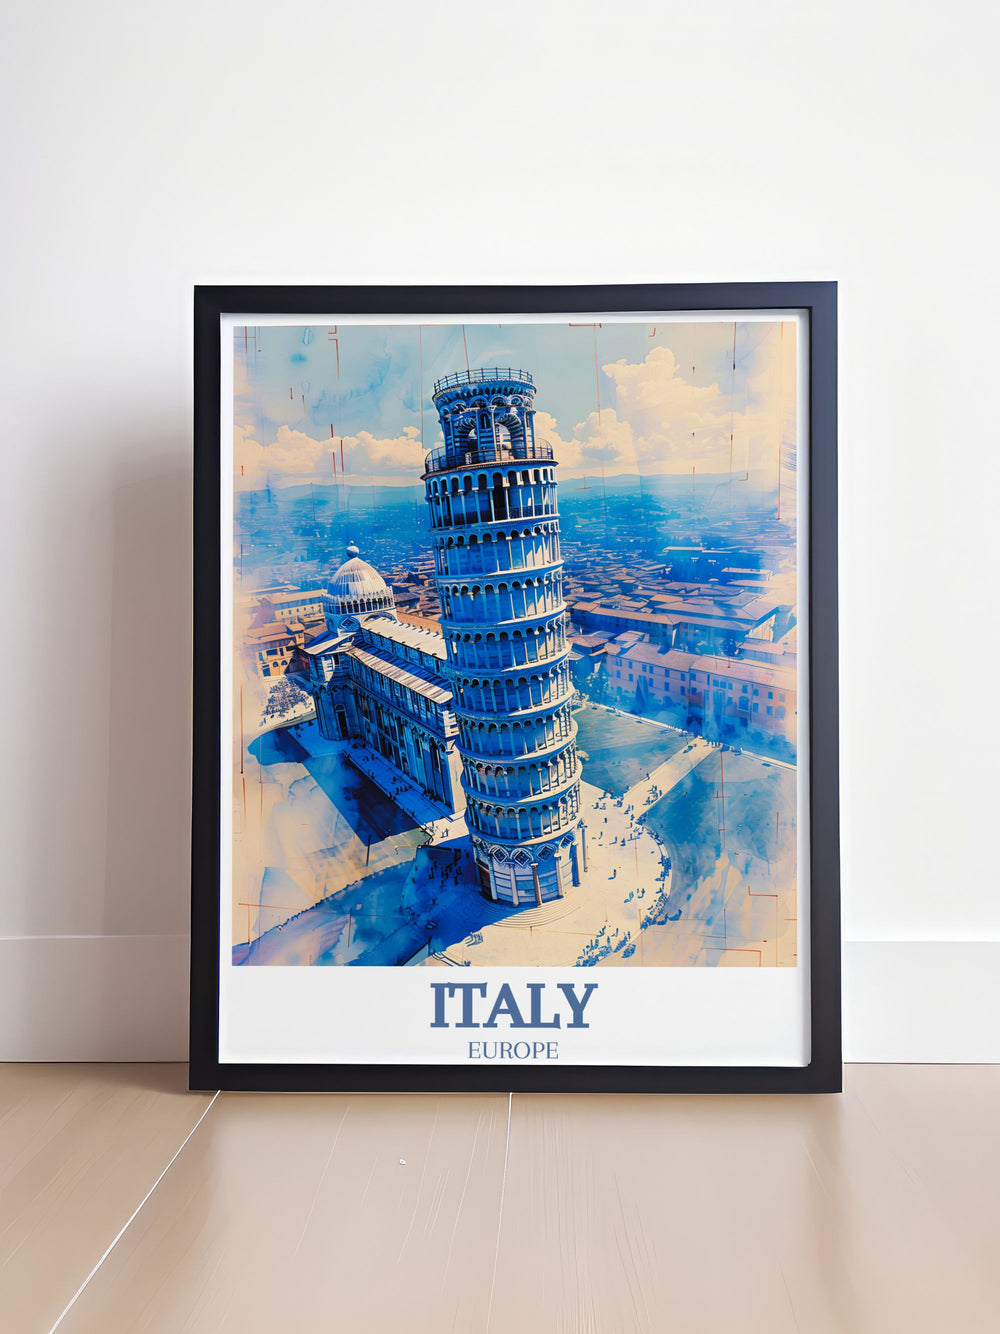 Featuring the iconic Leaning Tower and the magnificent Pisa Cathedral, this poster brings the essence of Italys architectural wonders into your living space.